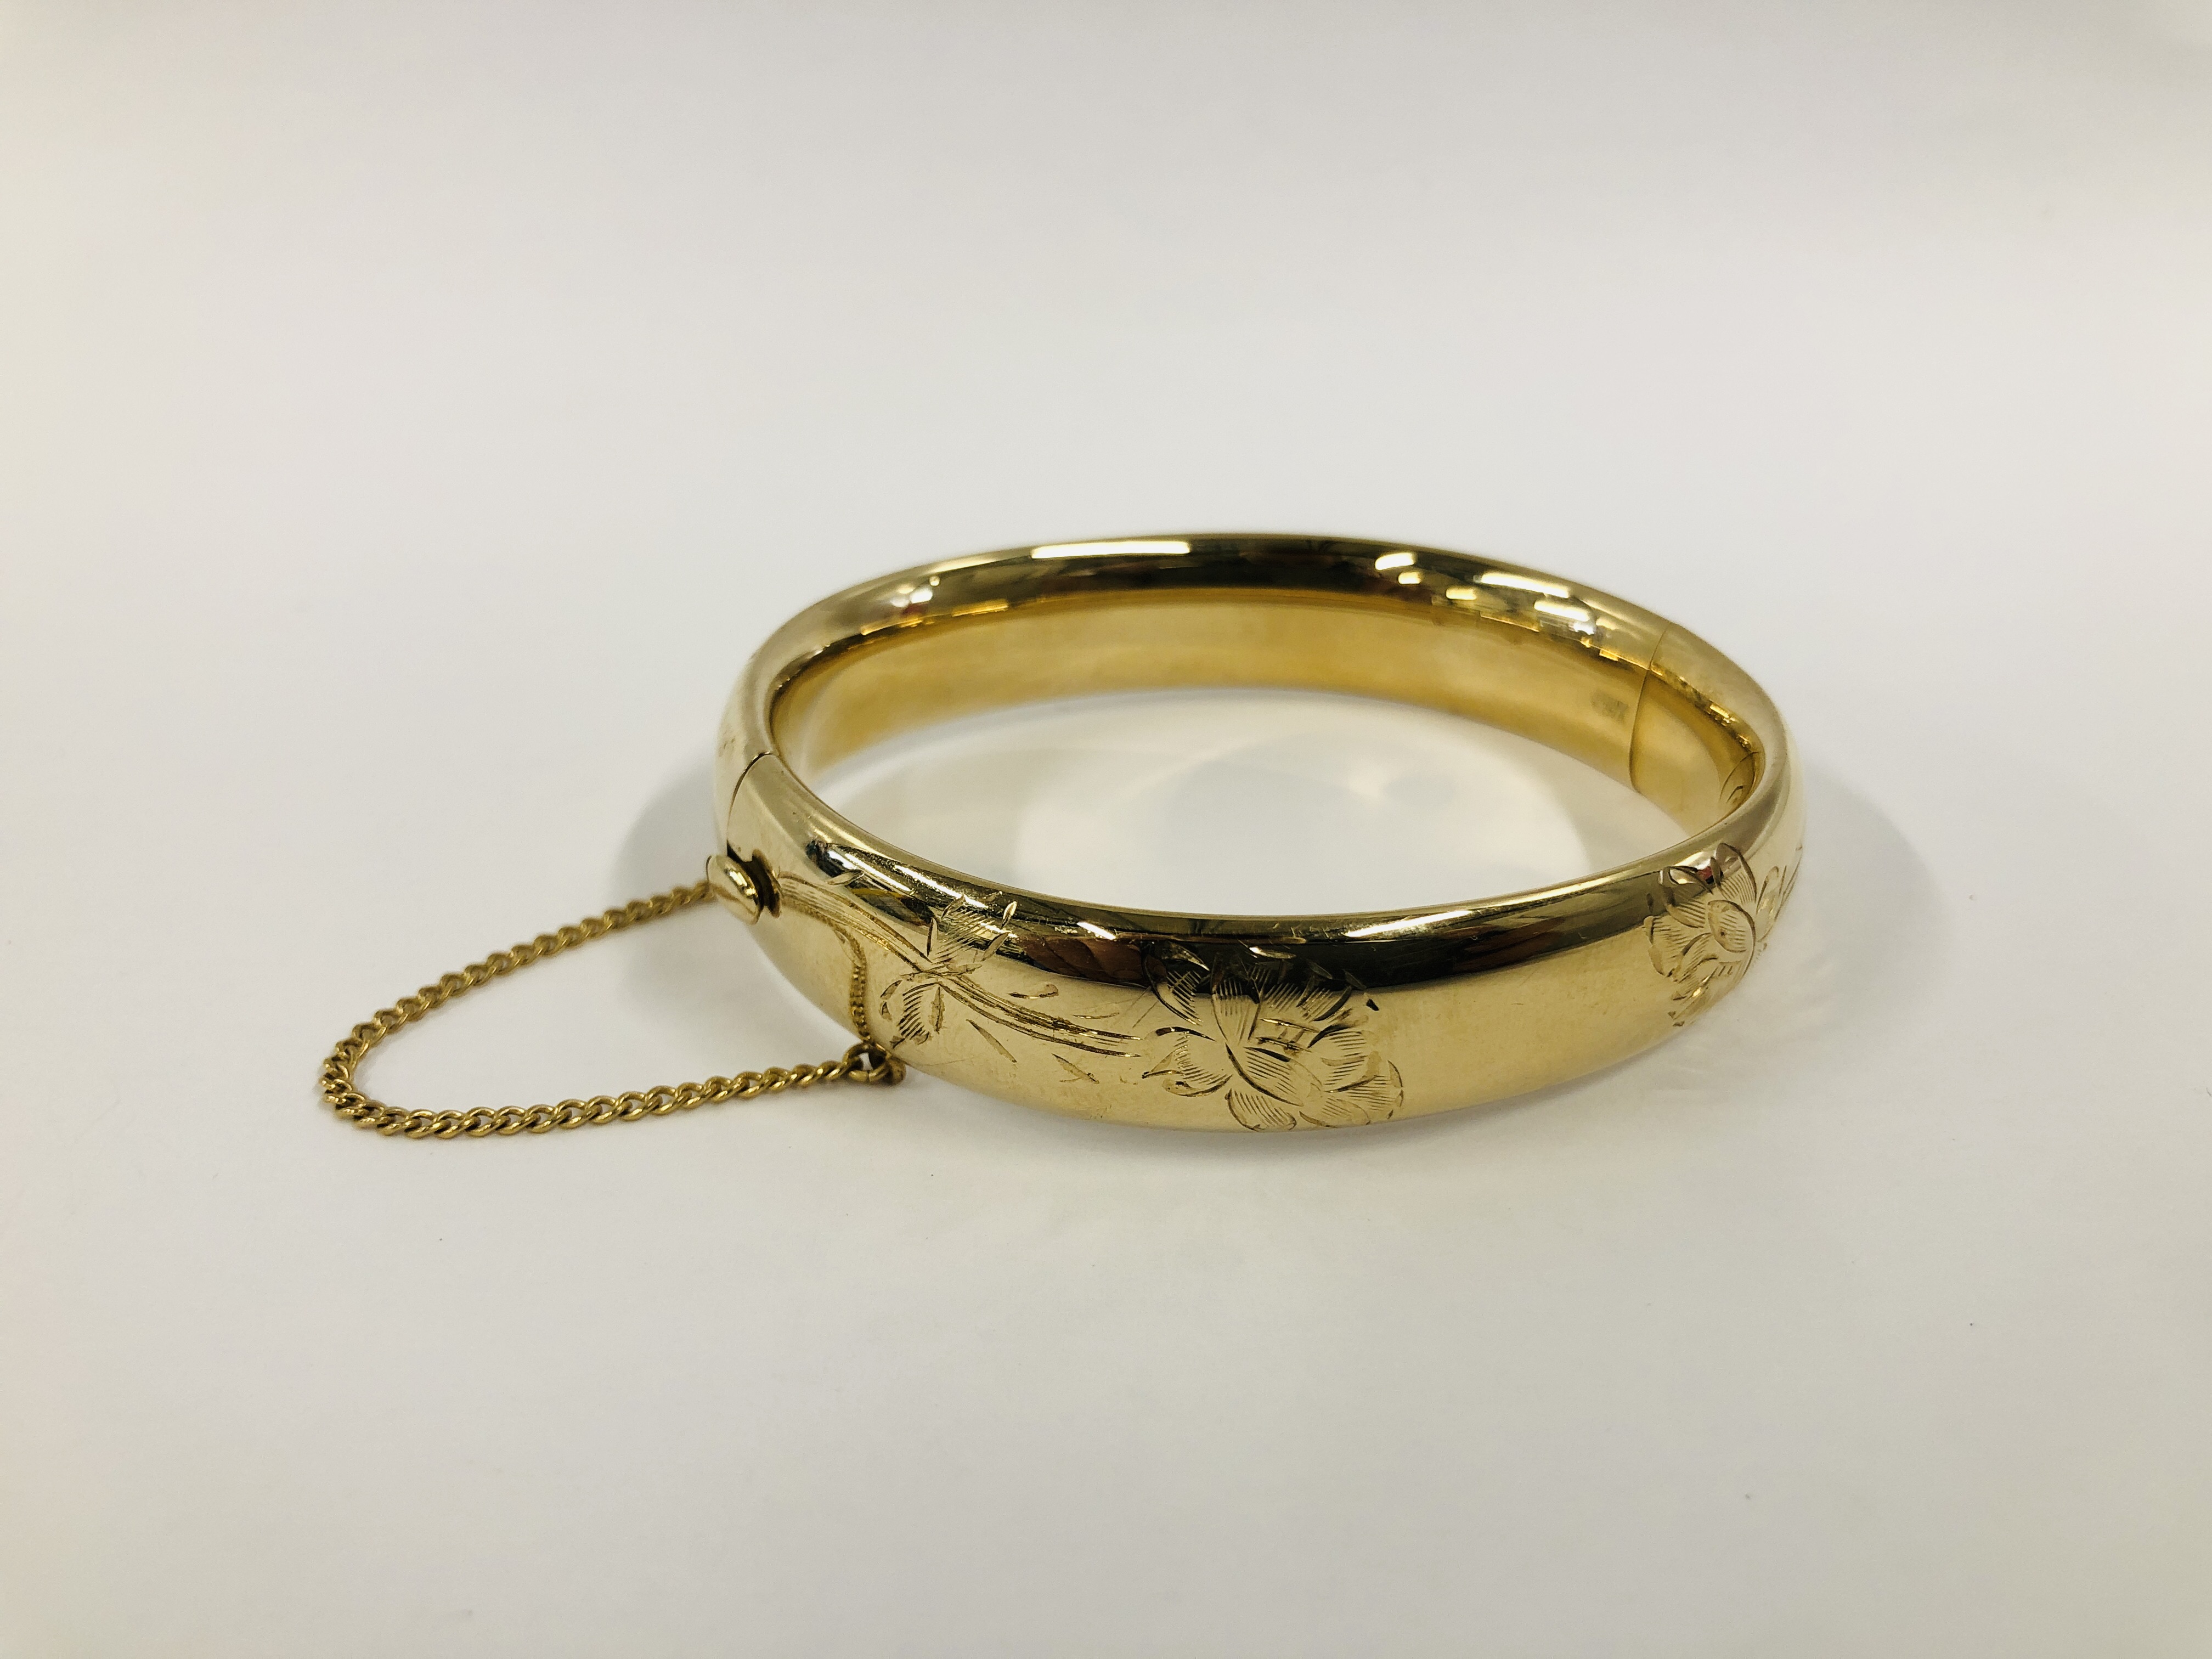 A GOLD FILLED HINGED BANGLE WITH CHASED DECORATION